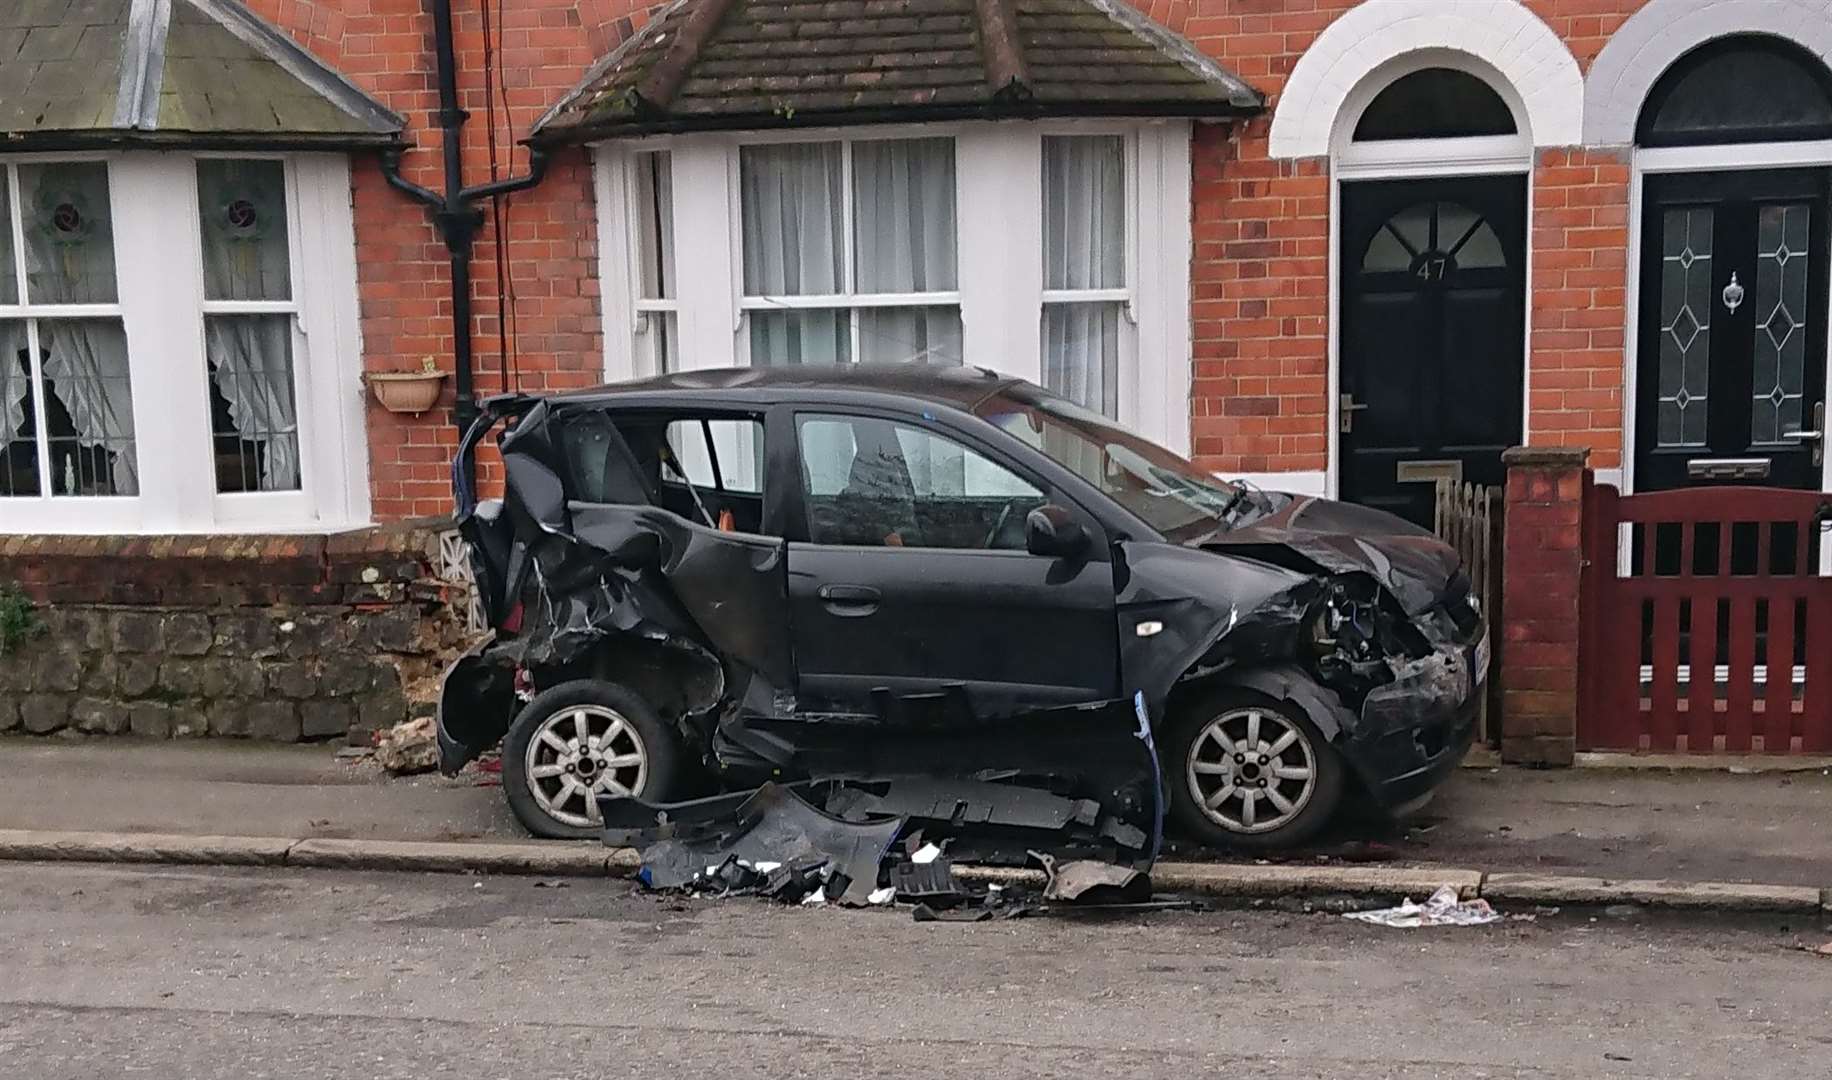 Three cars were said to be involved in the crash